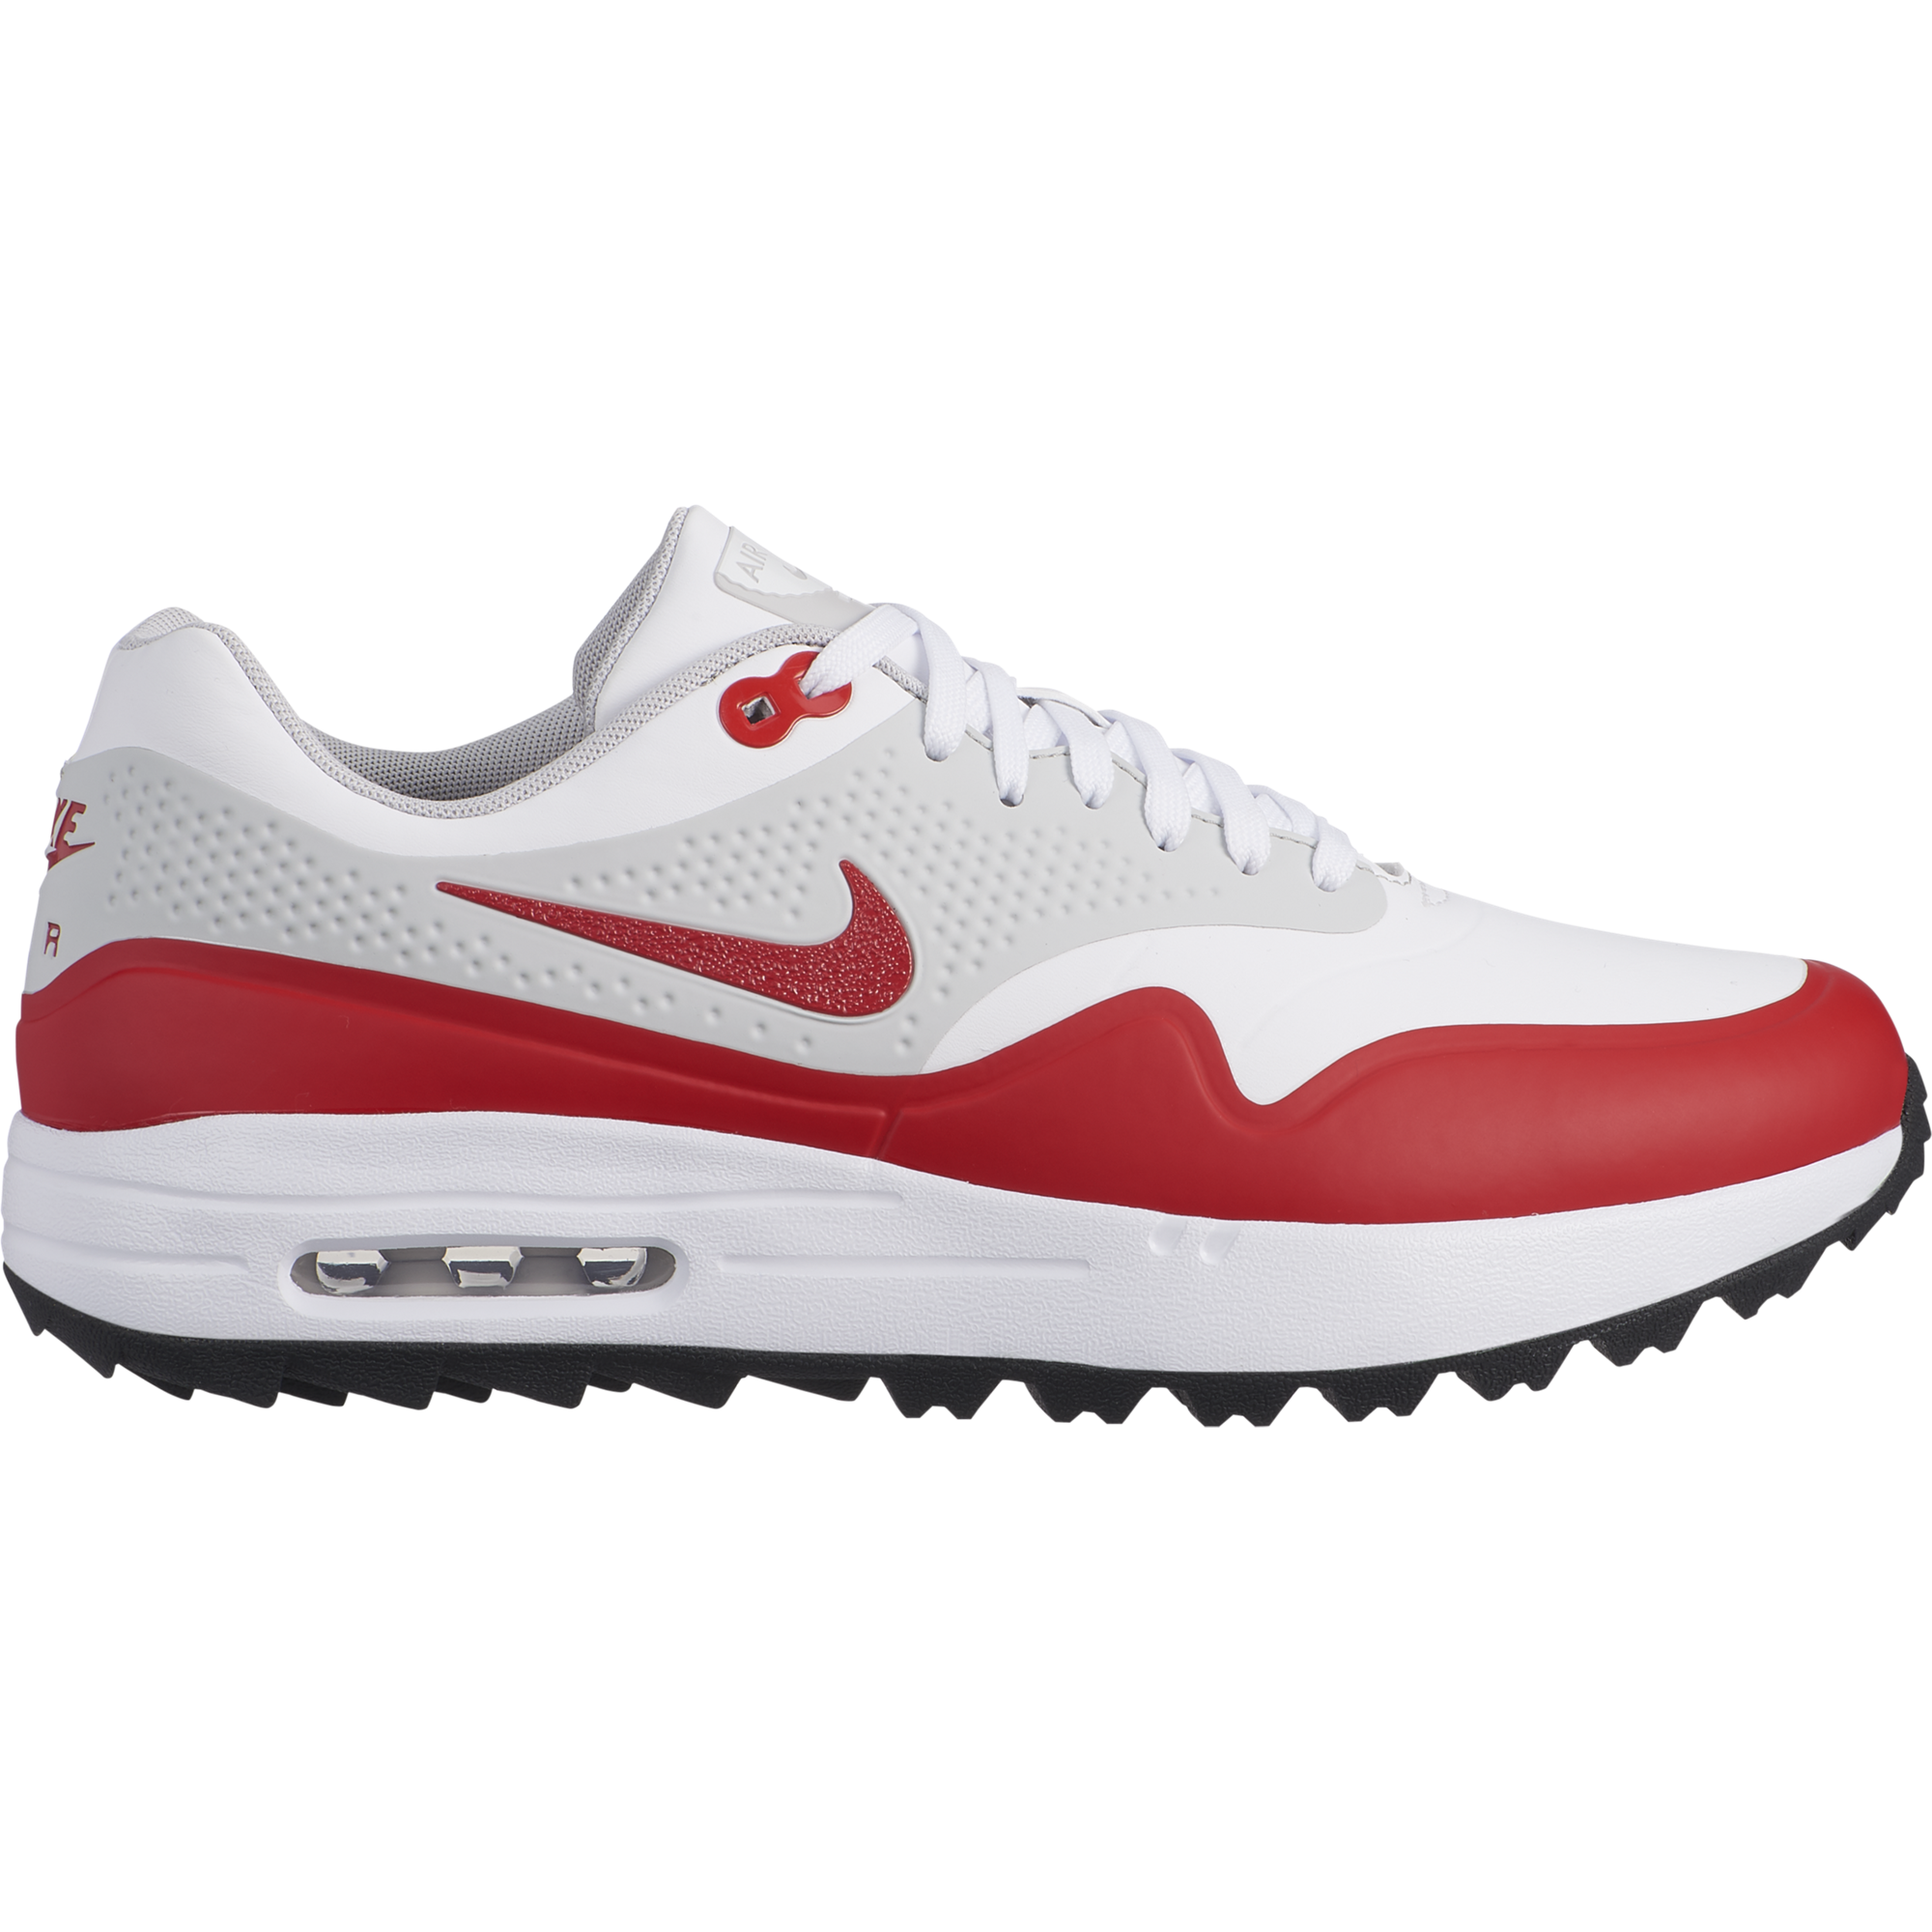 red golf shoes